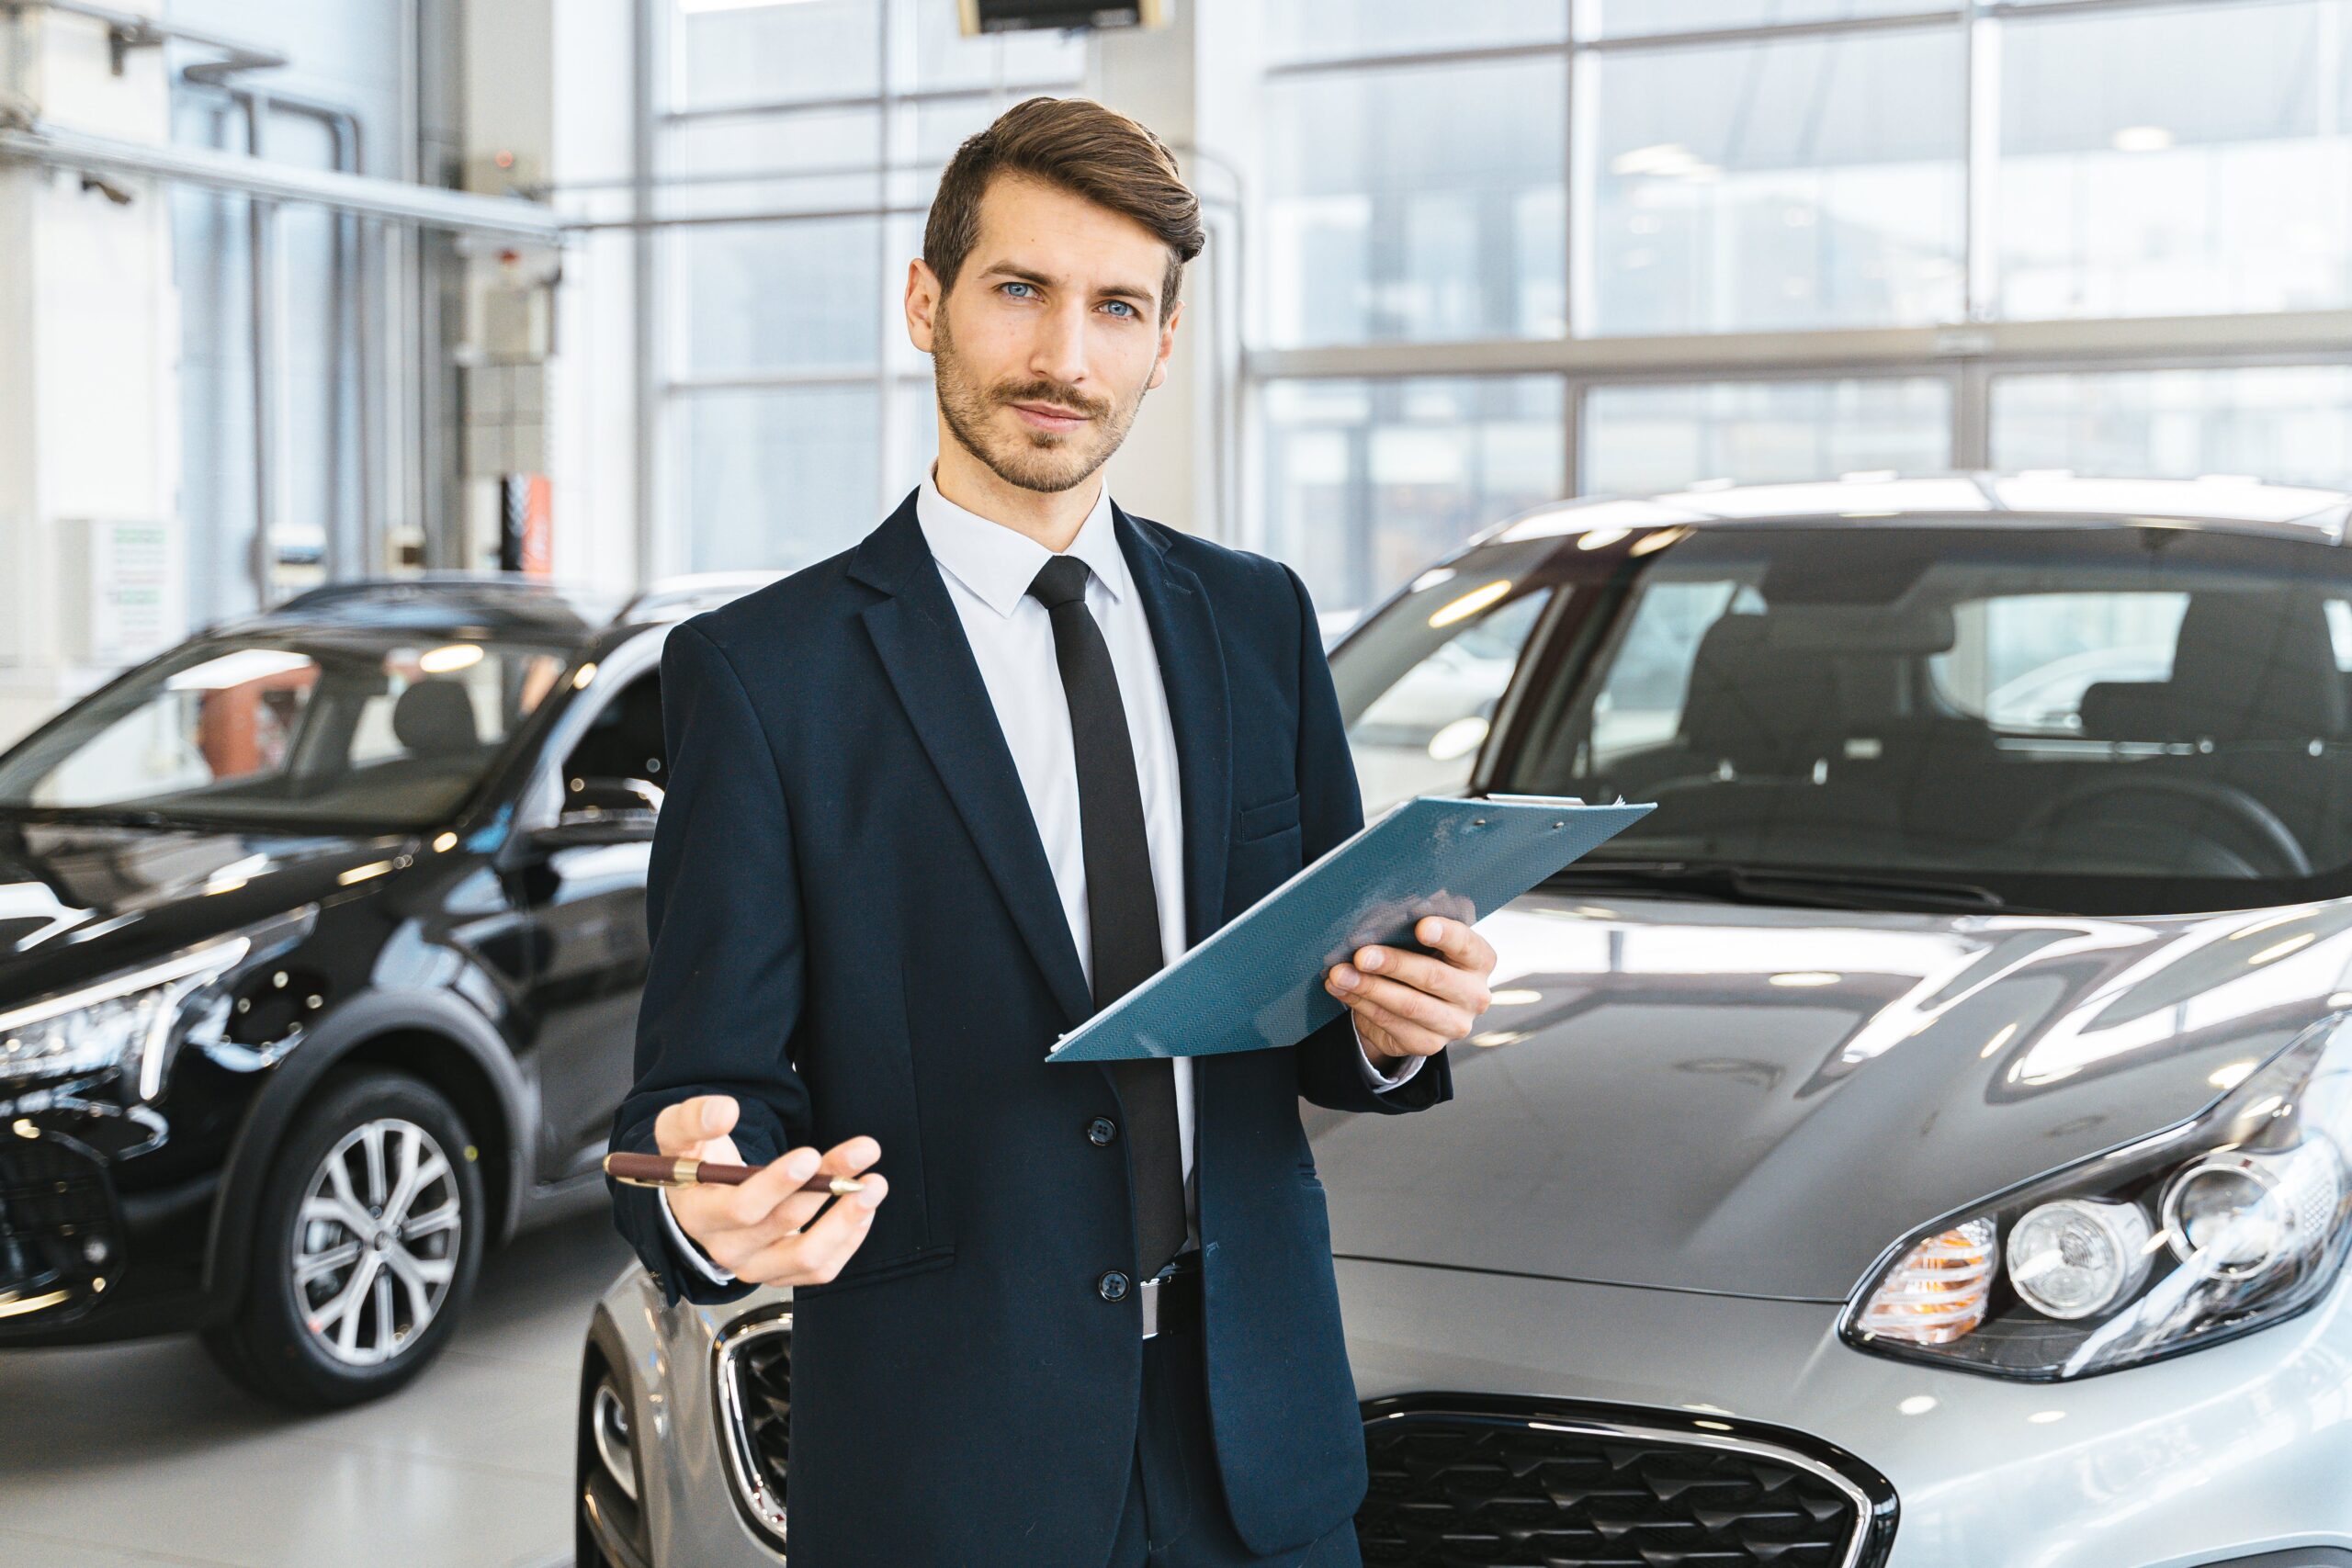 Salesman standing in front of 2 vehicles in a car dealership's showroom.